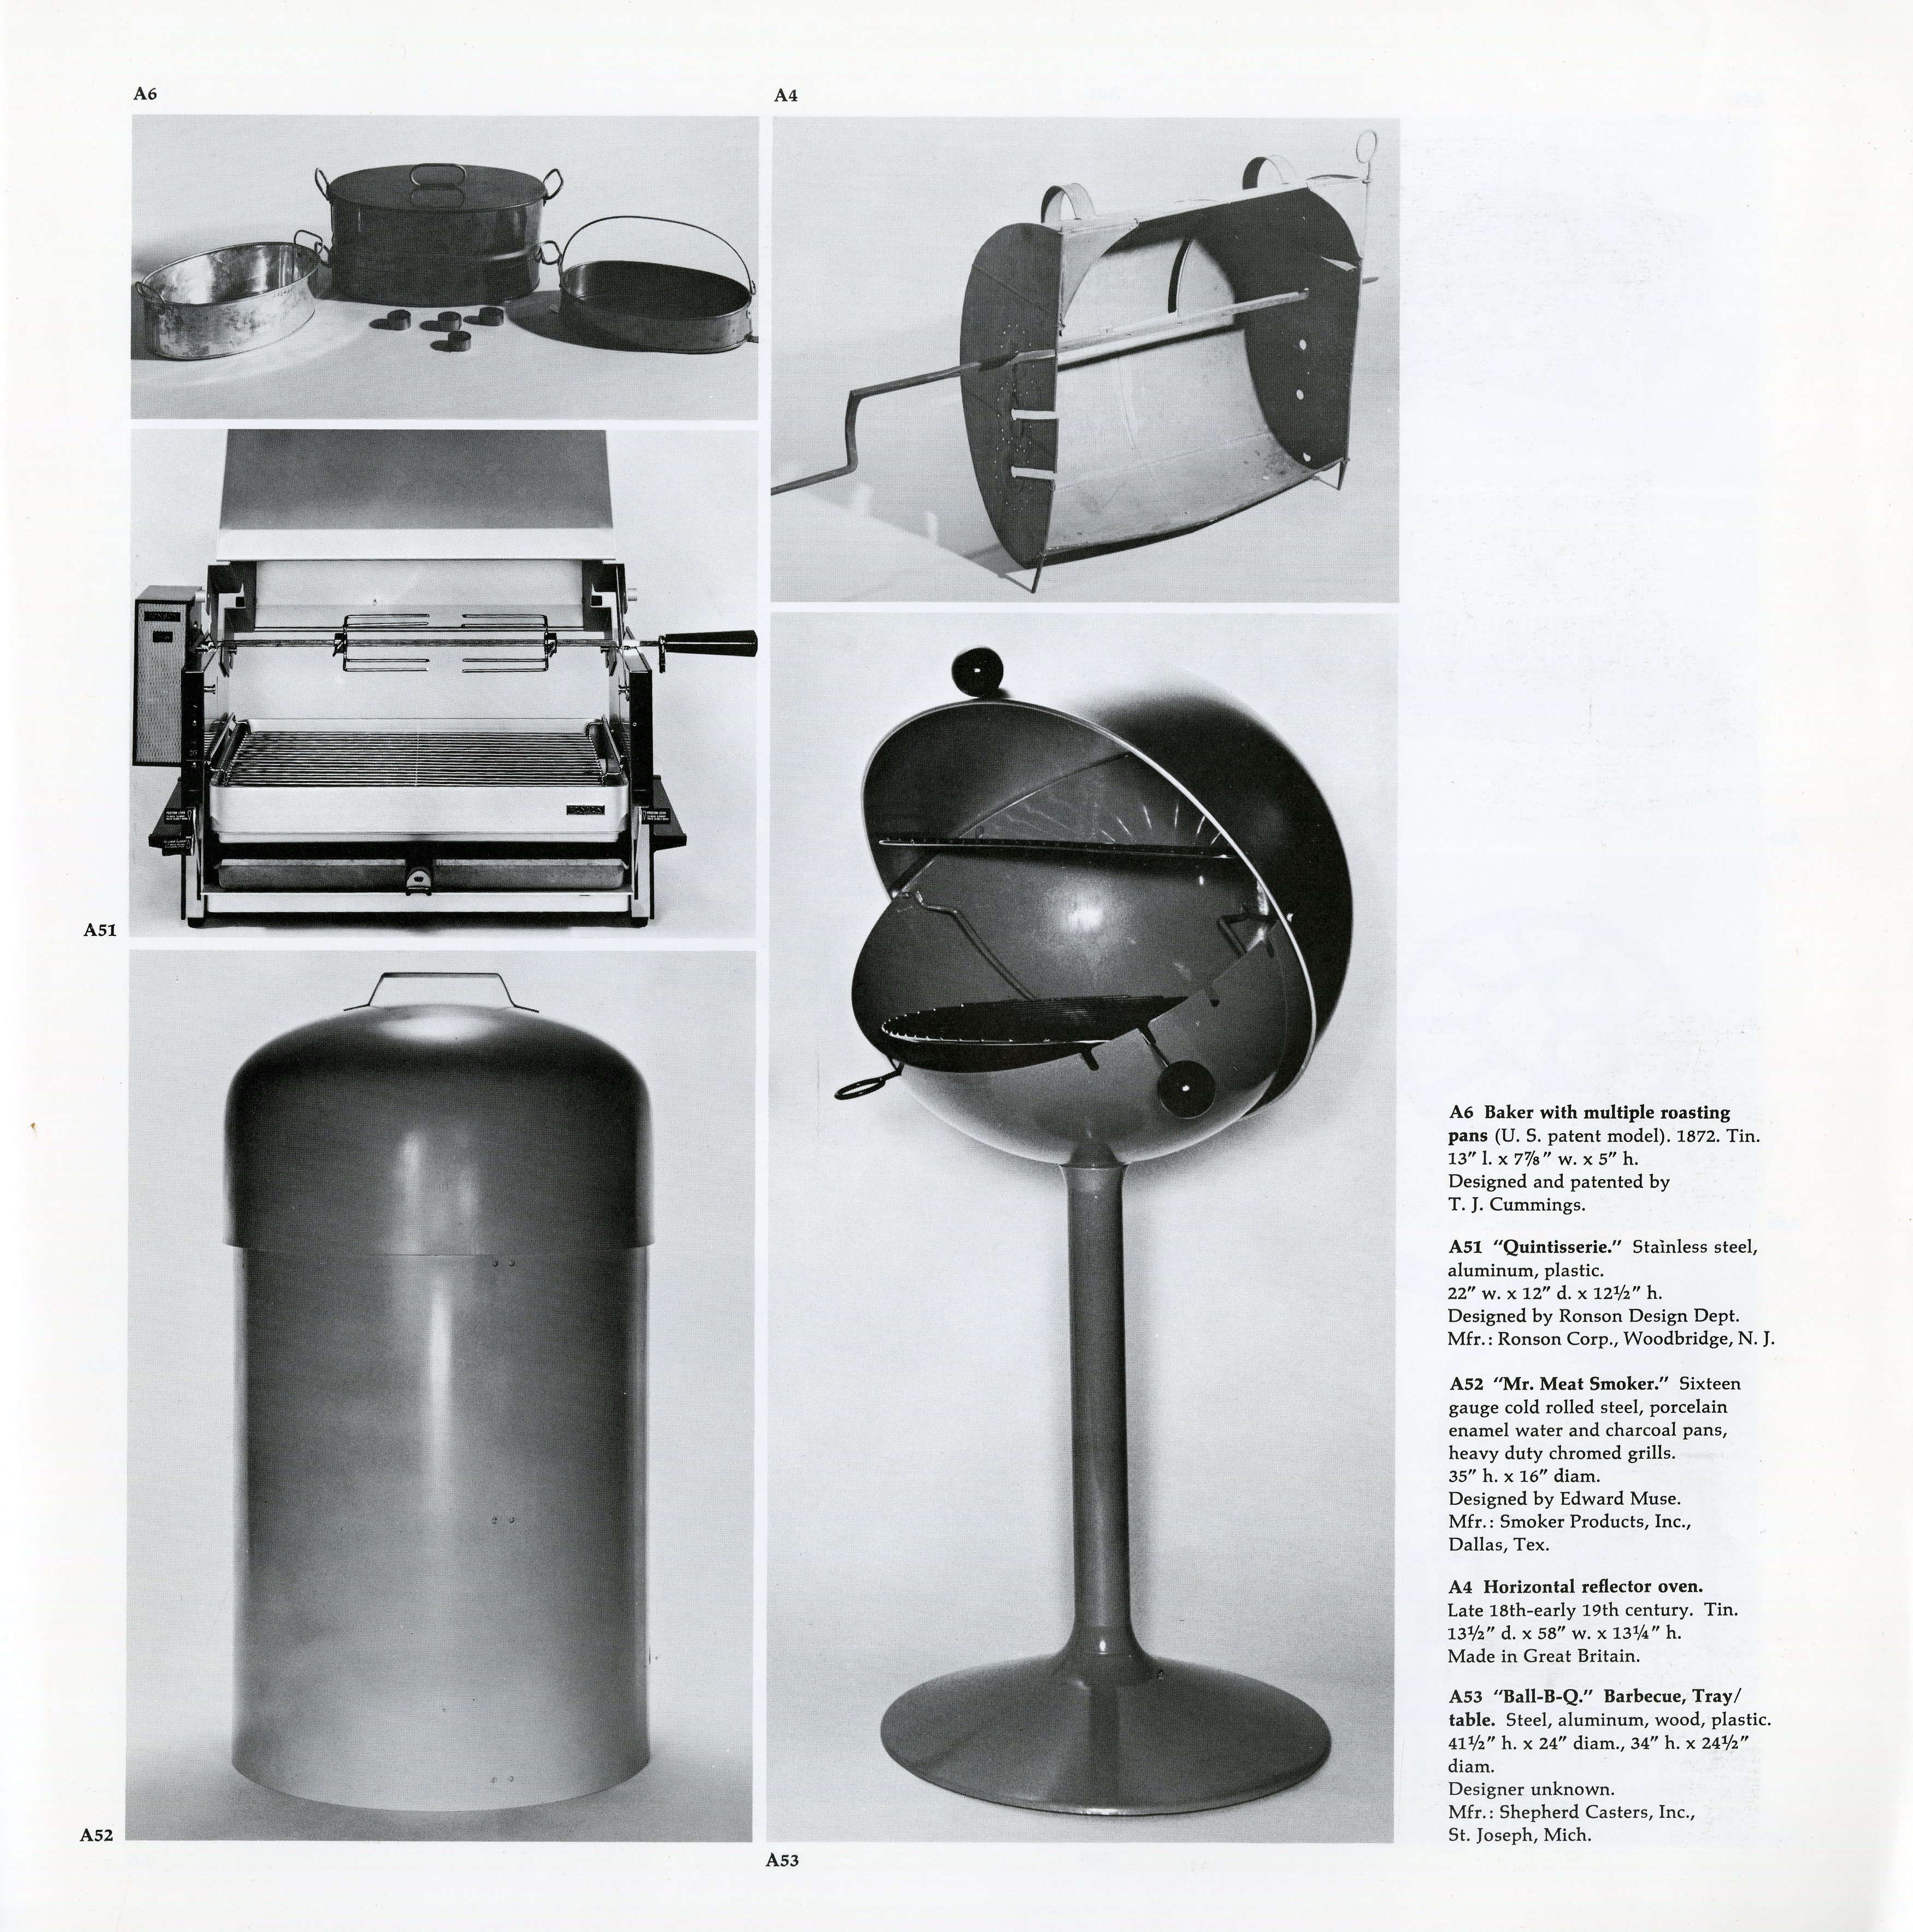 Objects for Preparing Food, exhibition catalogue, 1972.